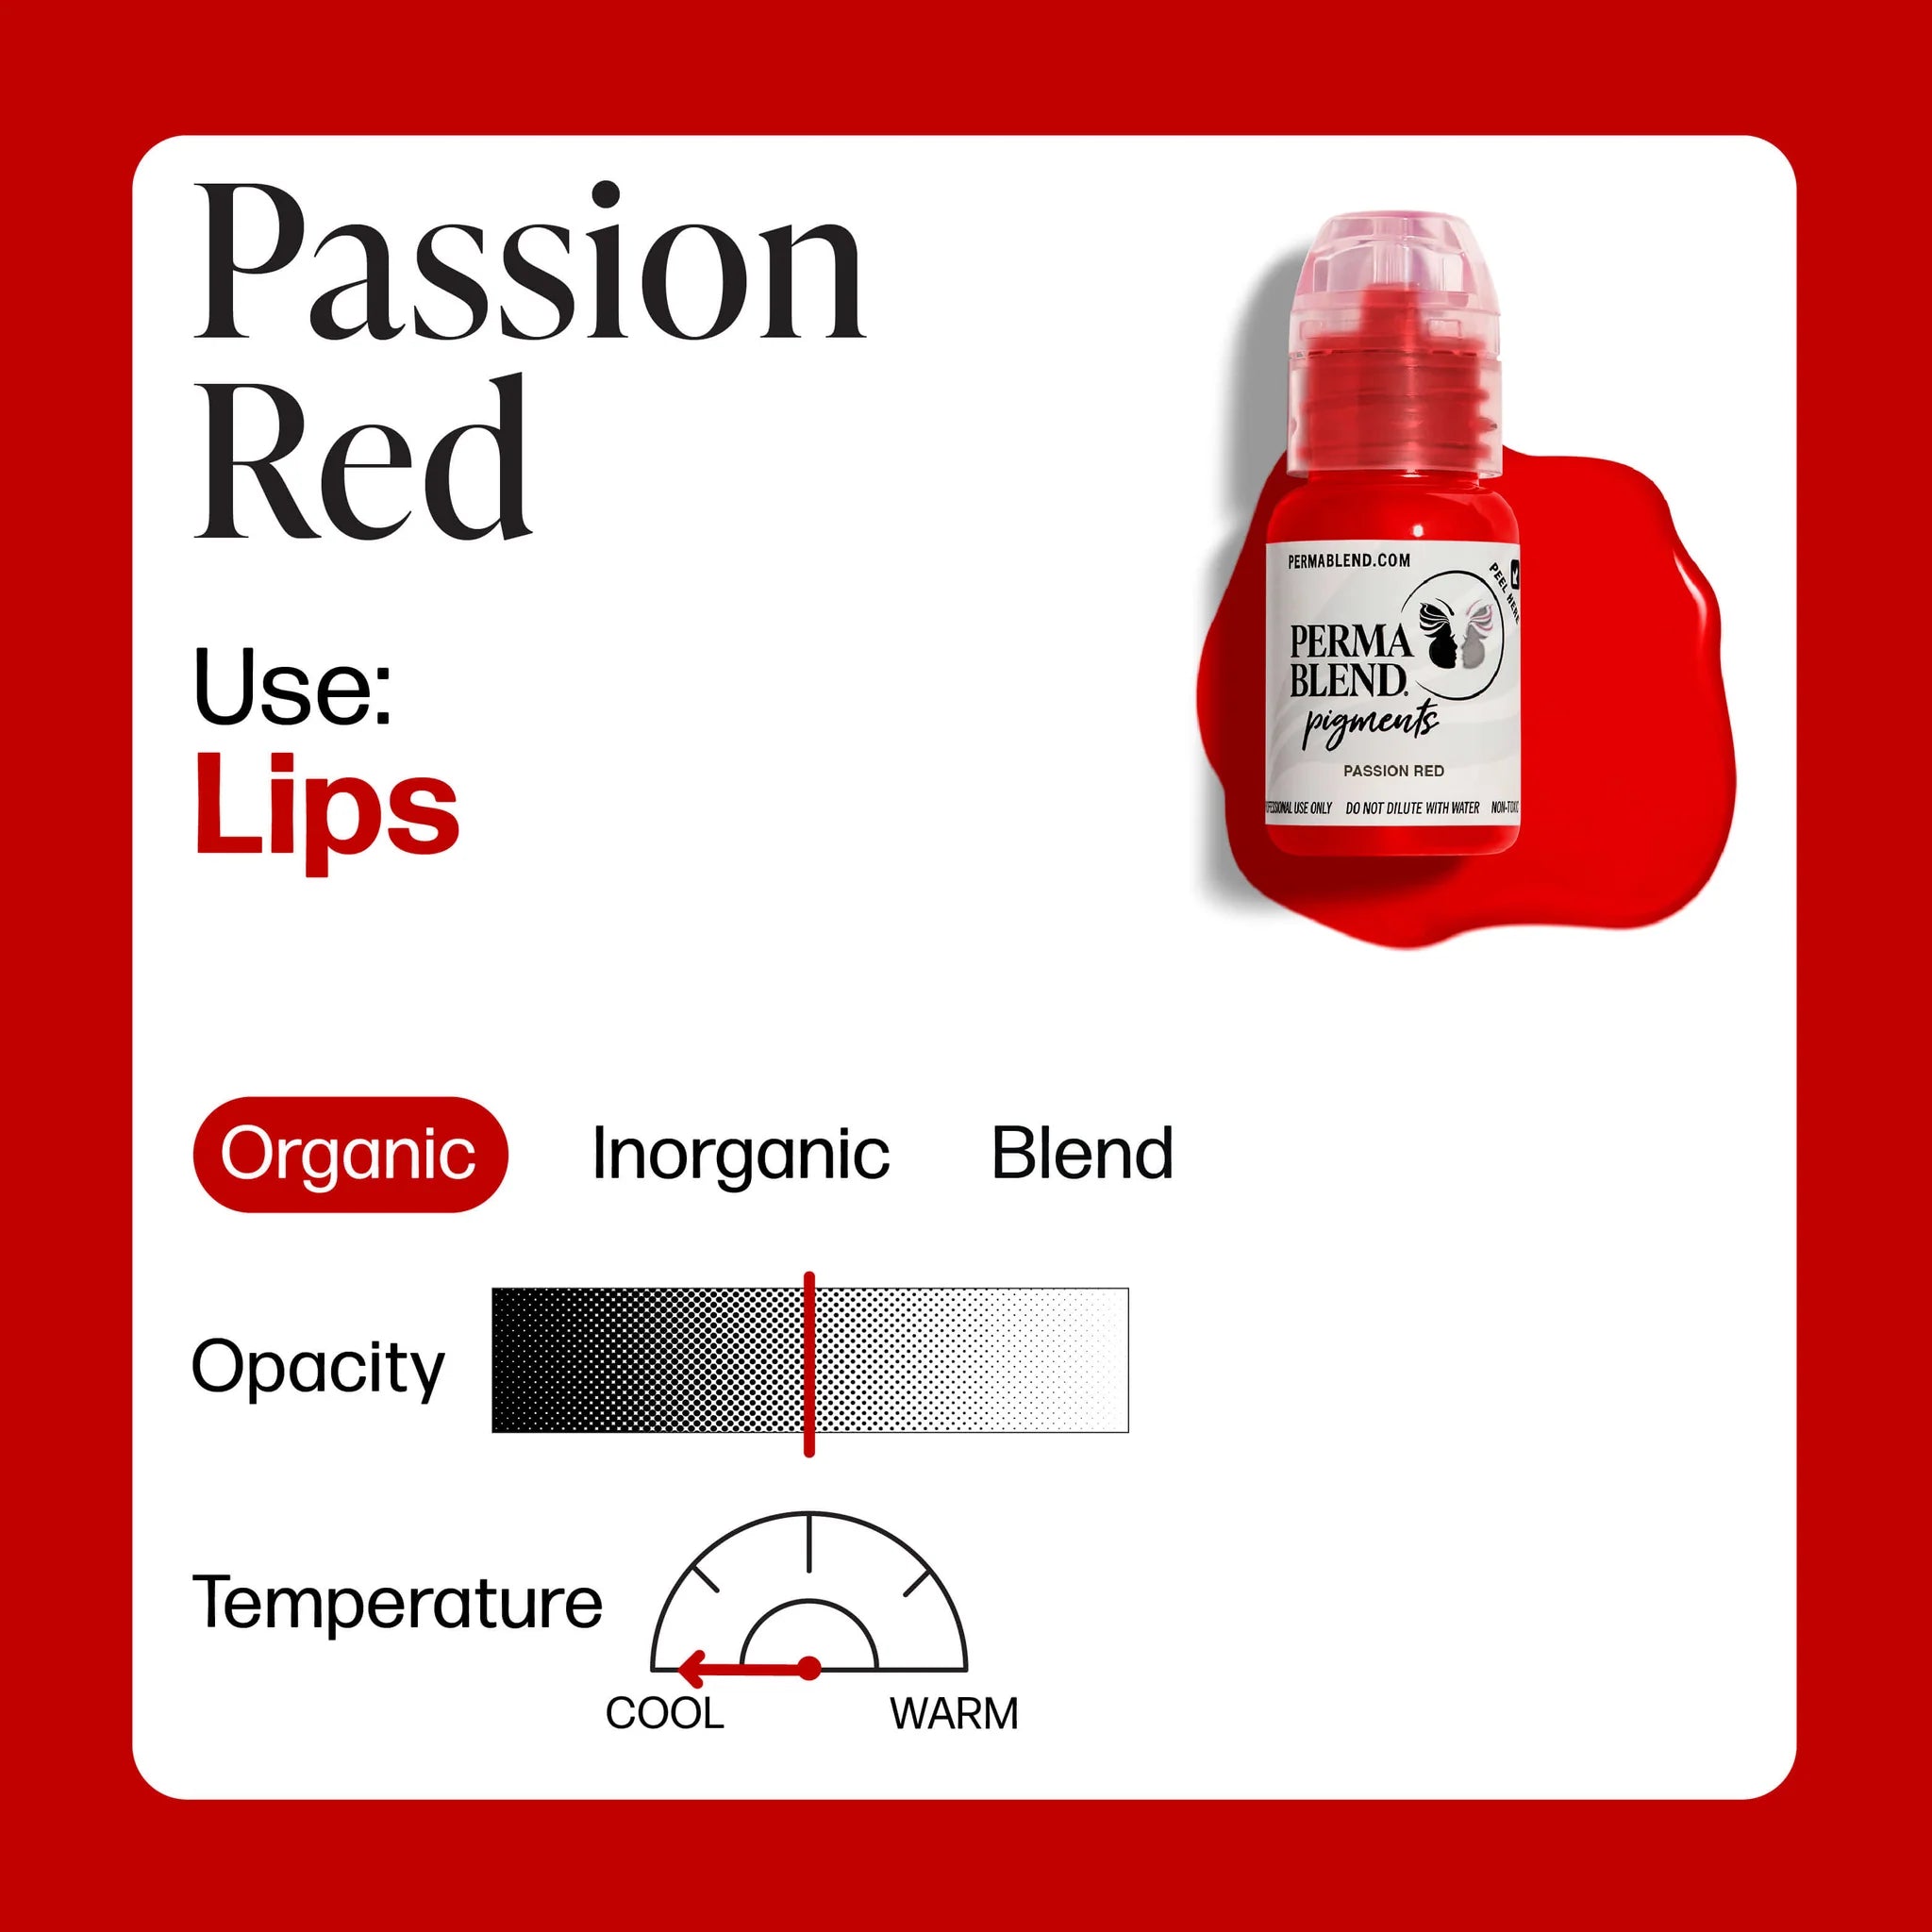 Perma Blend - Passion Red